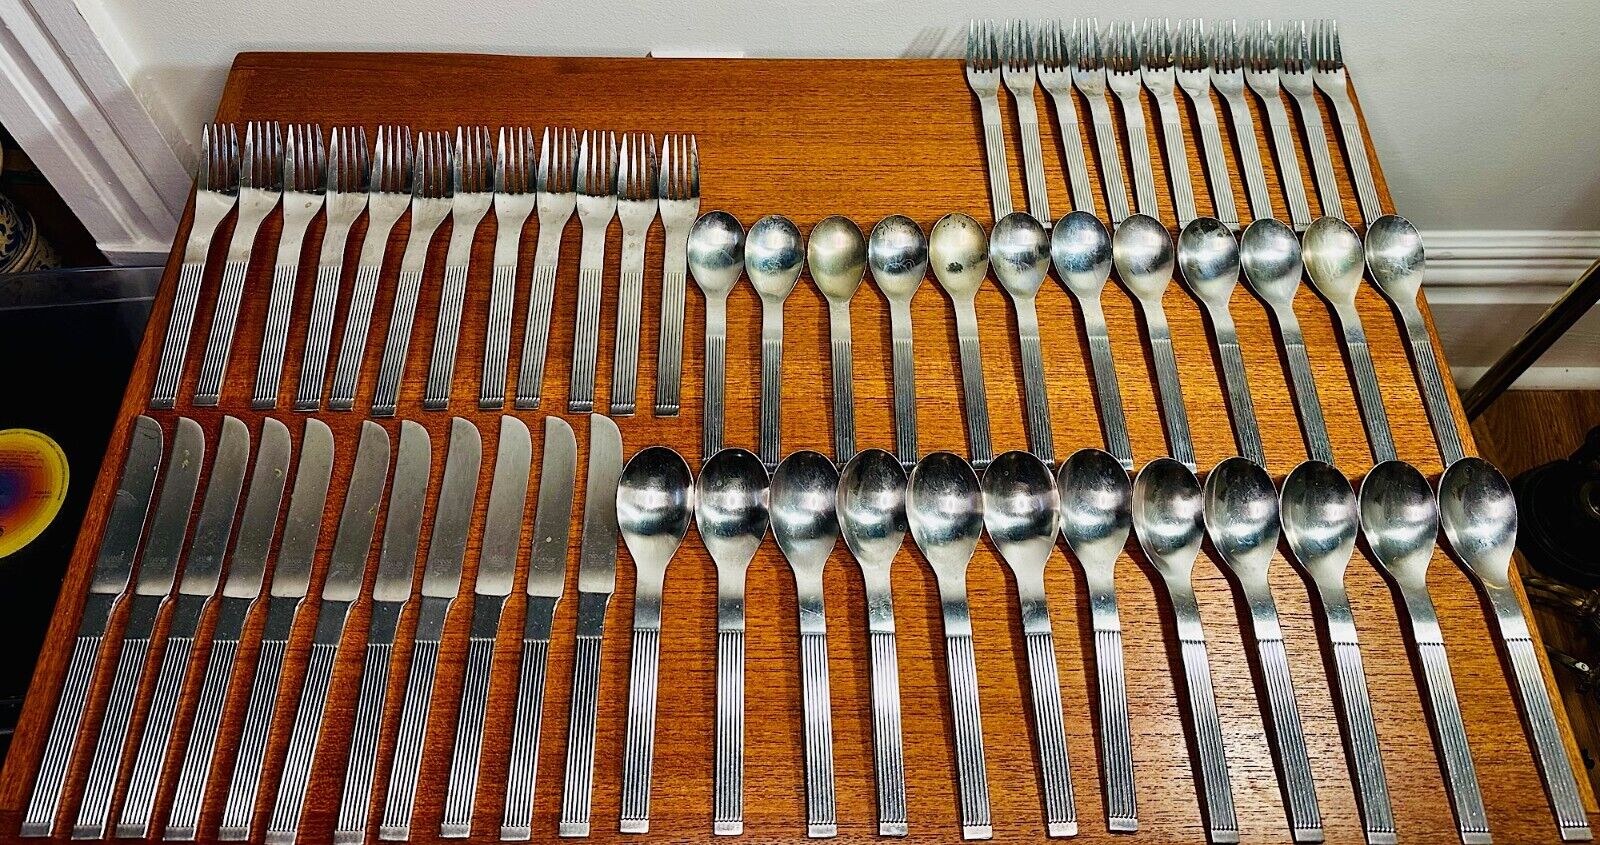 58 Pcs Dansk Thebes Stainless Flatware Knives Forks Spoons (11-12 Place Setting)